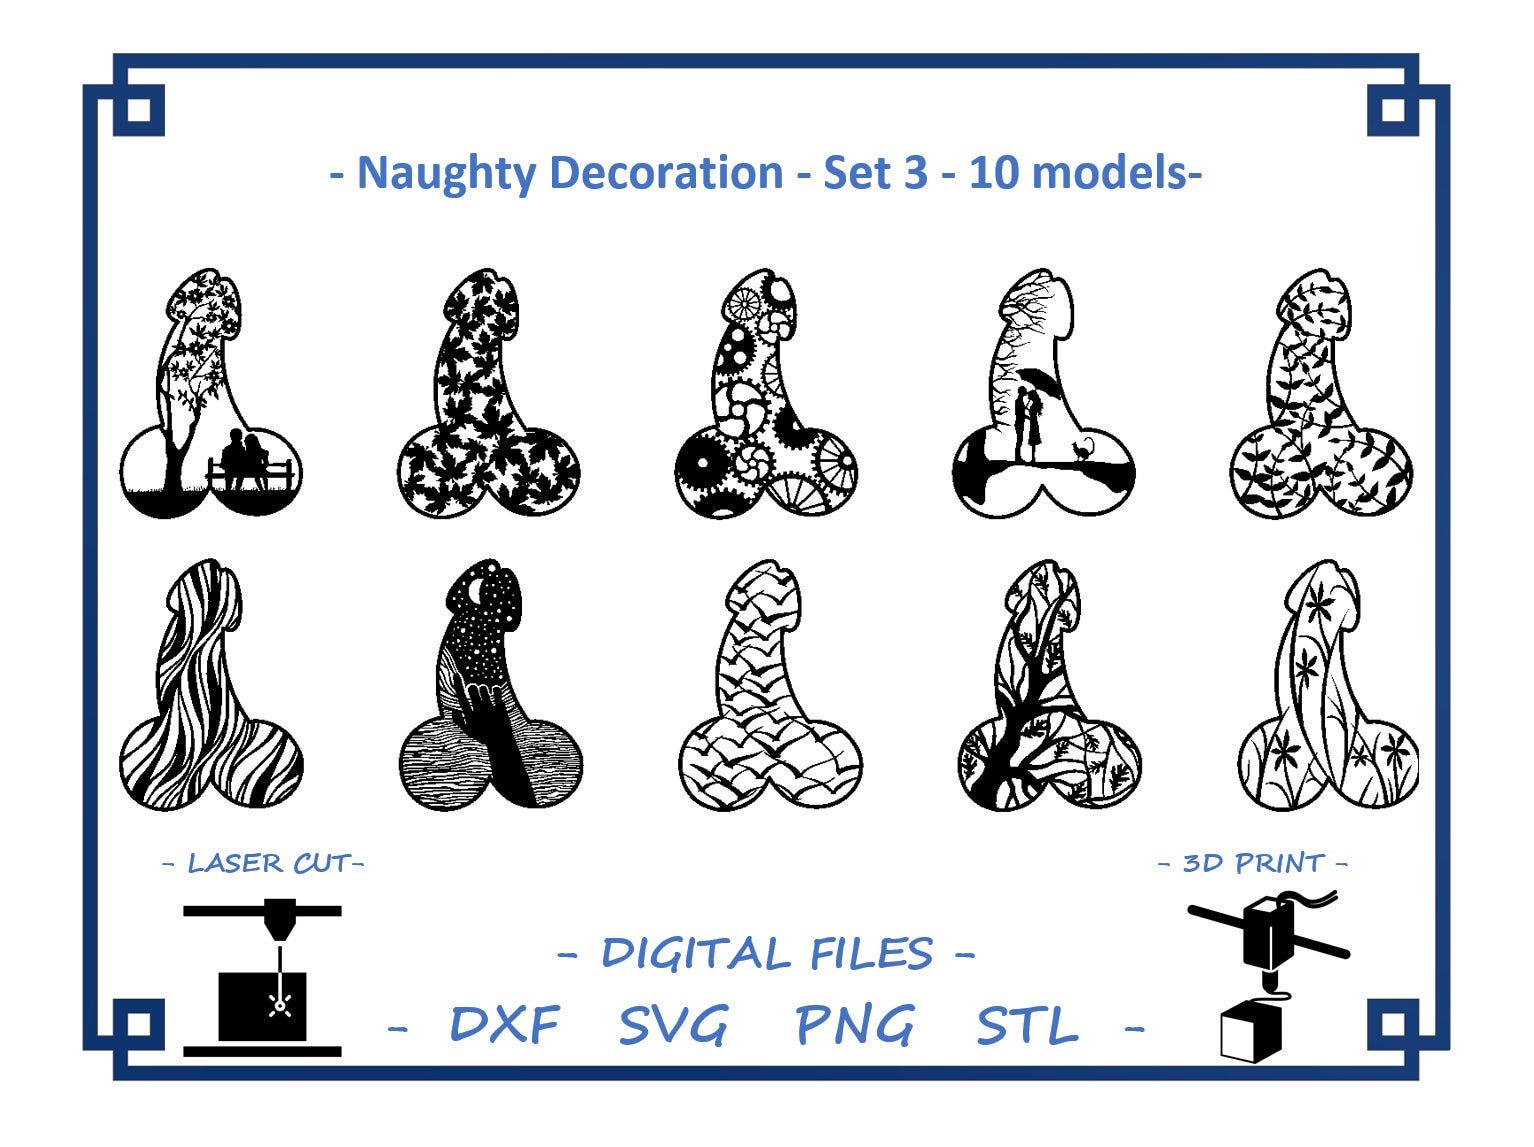 Naughty Decoration Set 3 - 10 models - Digital files for Laser Cutting, 3D Printing